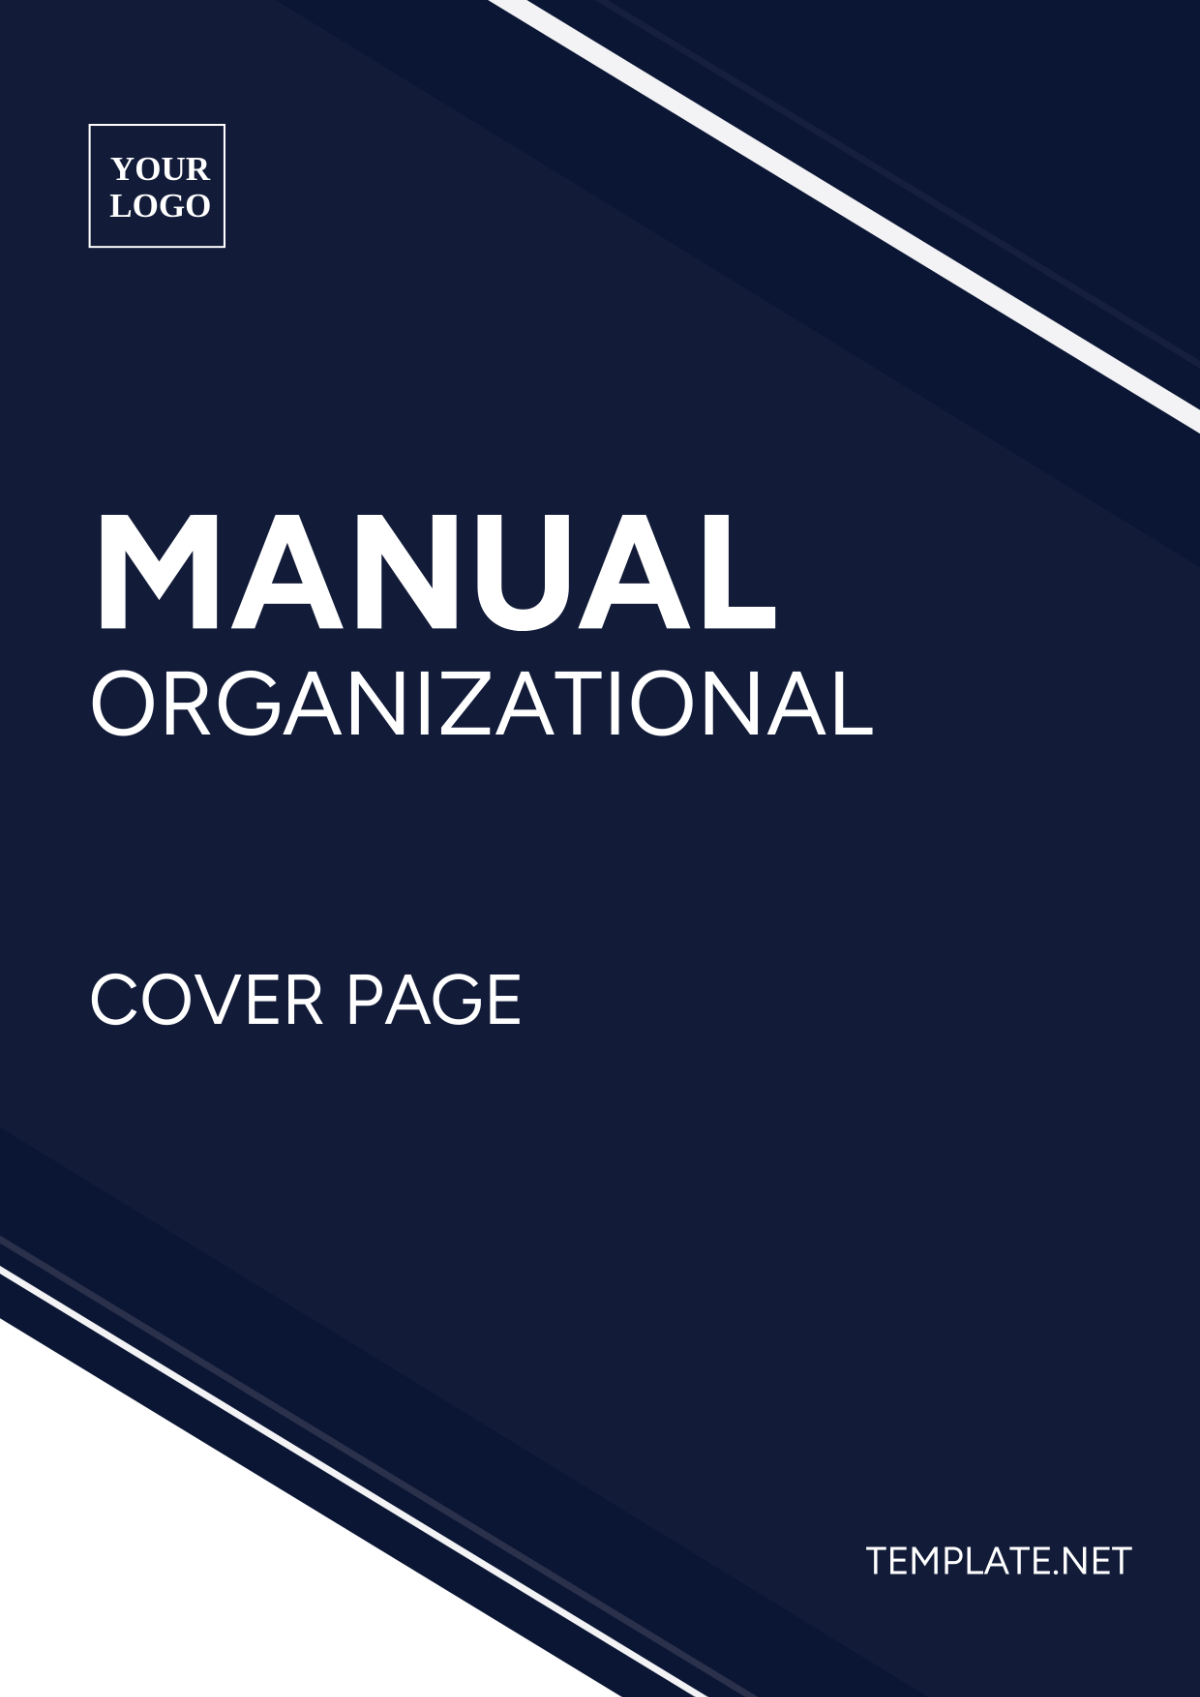 Free Manual Organizational Cover Page Template